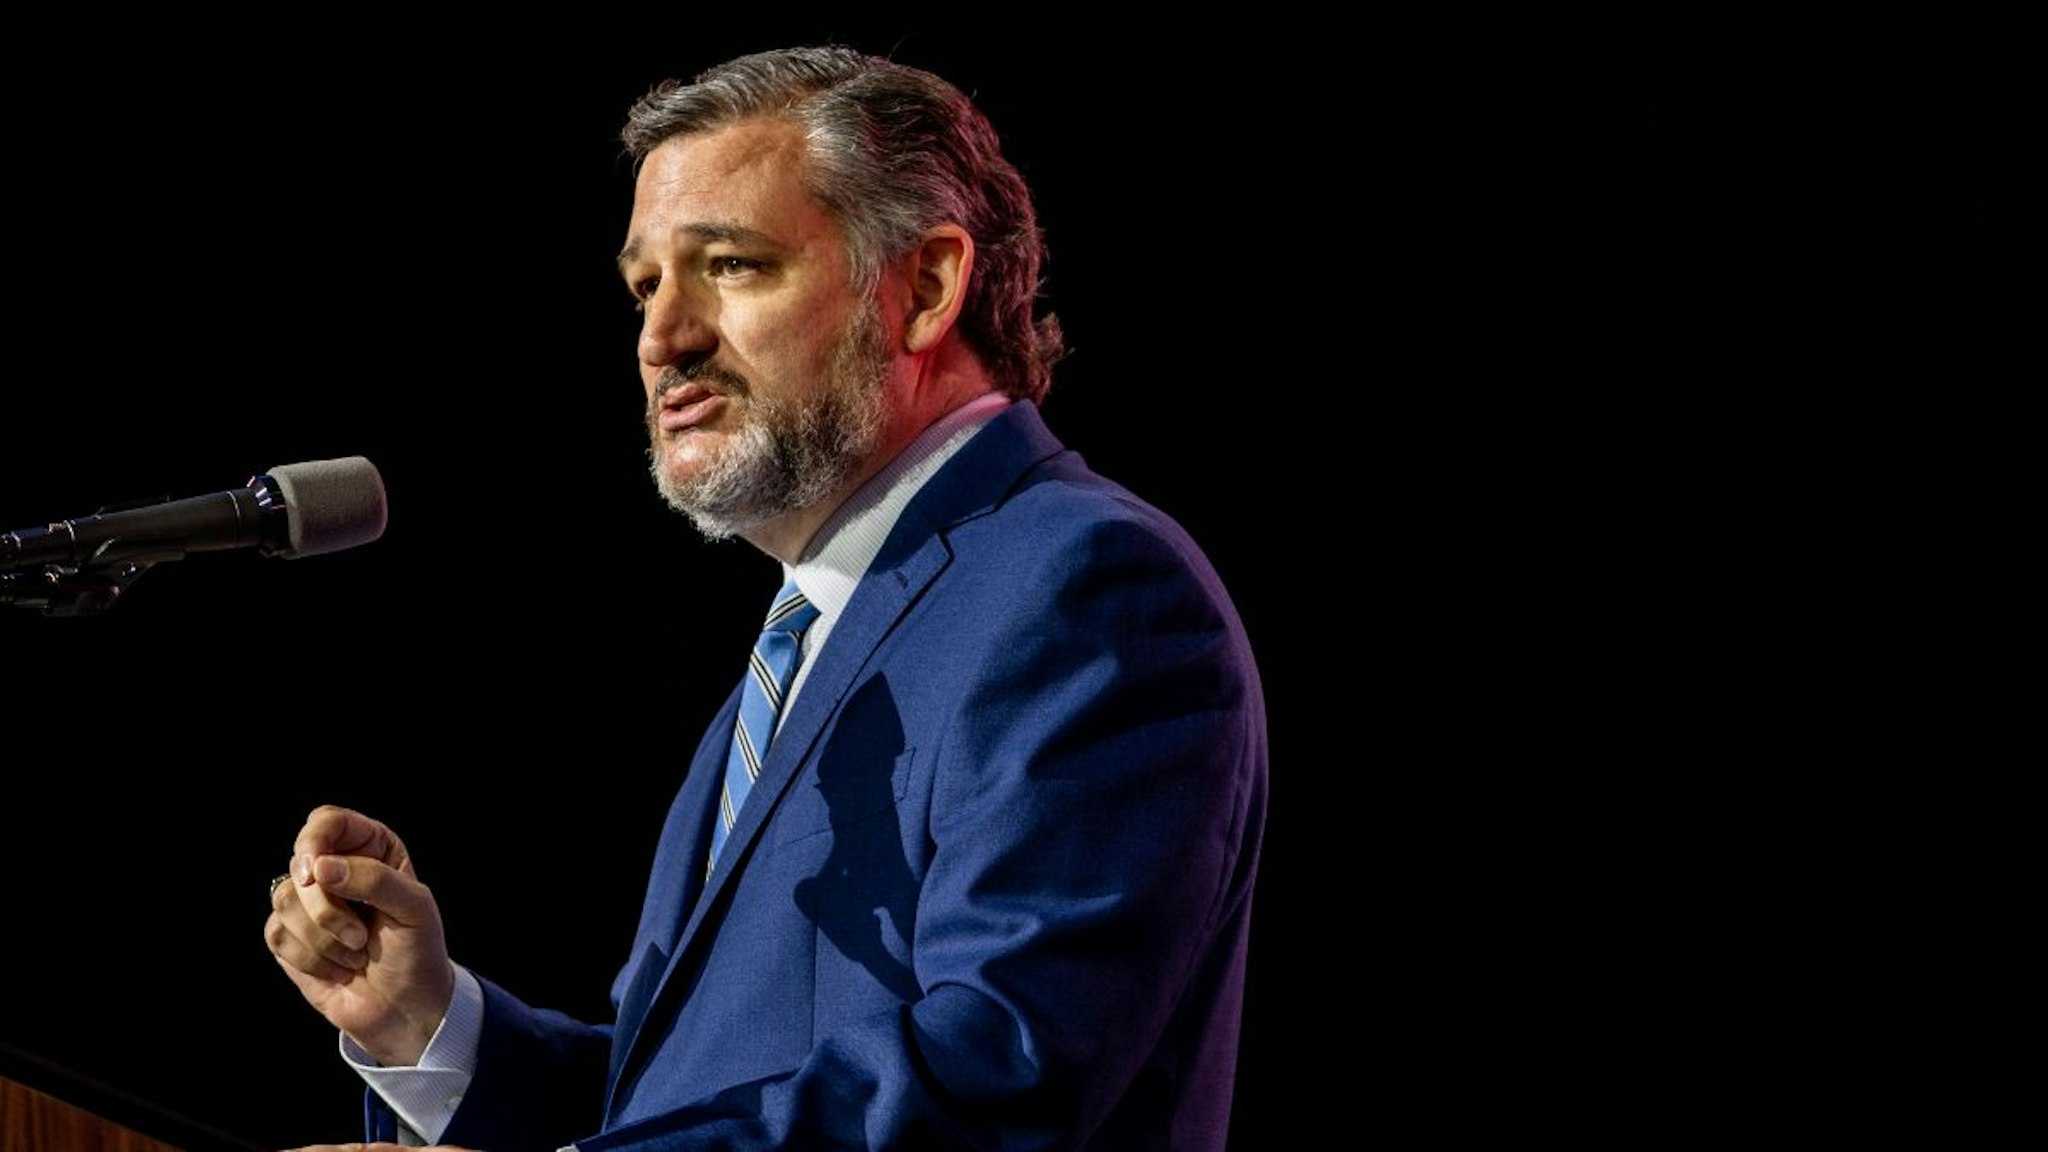 U.S. Sen. Ted Cruz (R-TX) speaks during the National Rifle Association (NRA) annual convention at the George R. Brown Convention Center on May 27, 2022 in Houston, Texas.